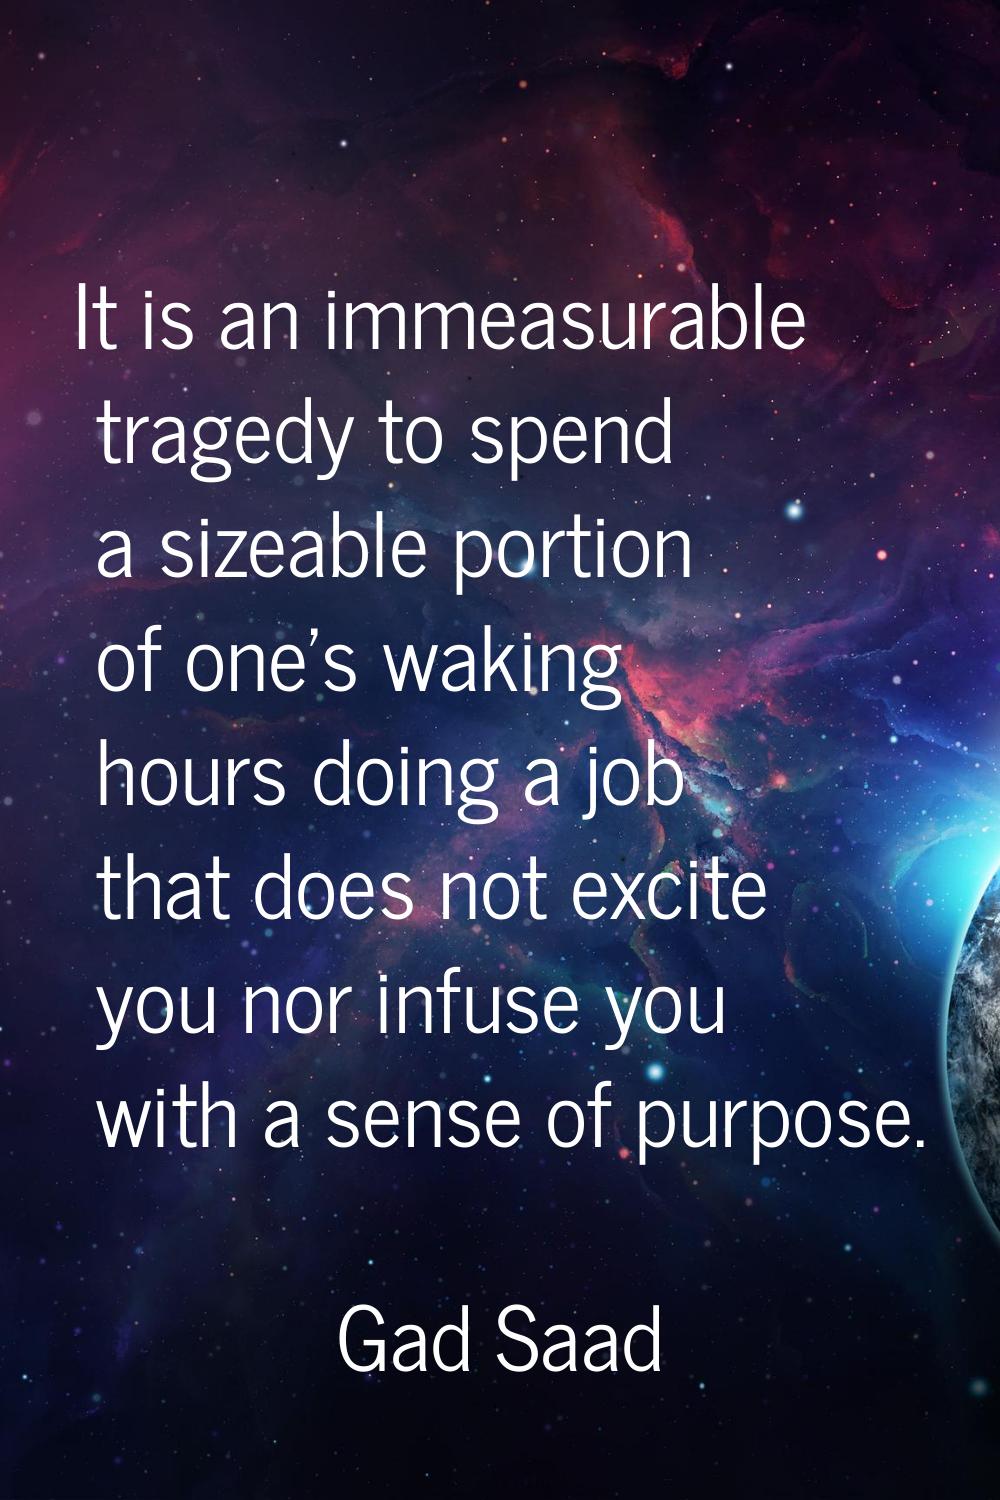 It is an immeasurable tragedy to spend a sizeable portion of one's waking hours doing a job that do